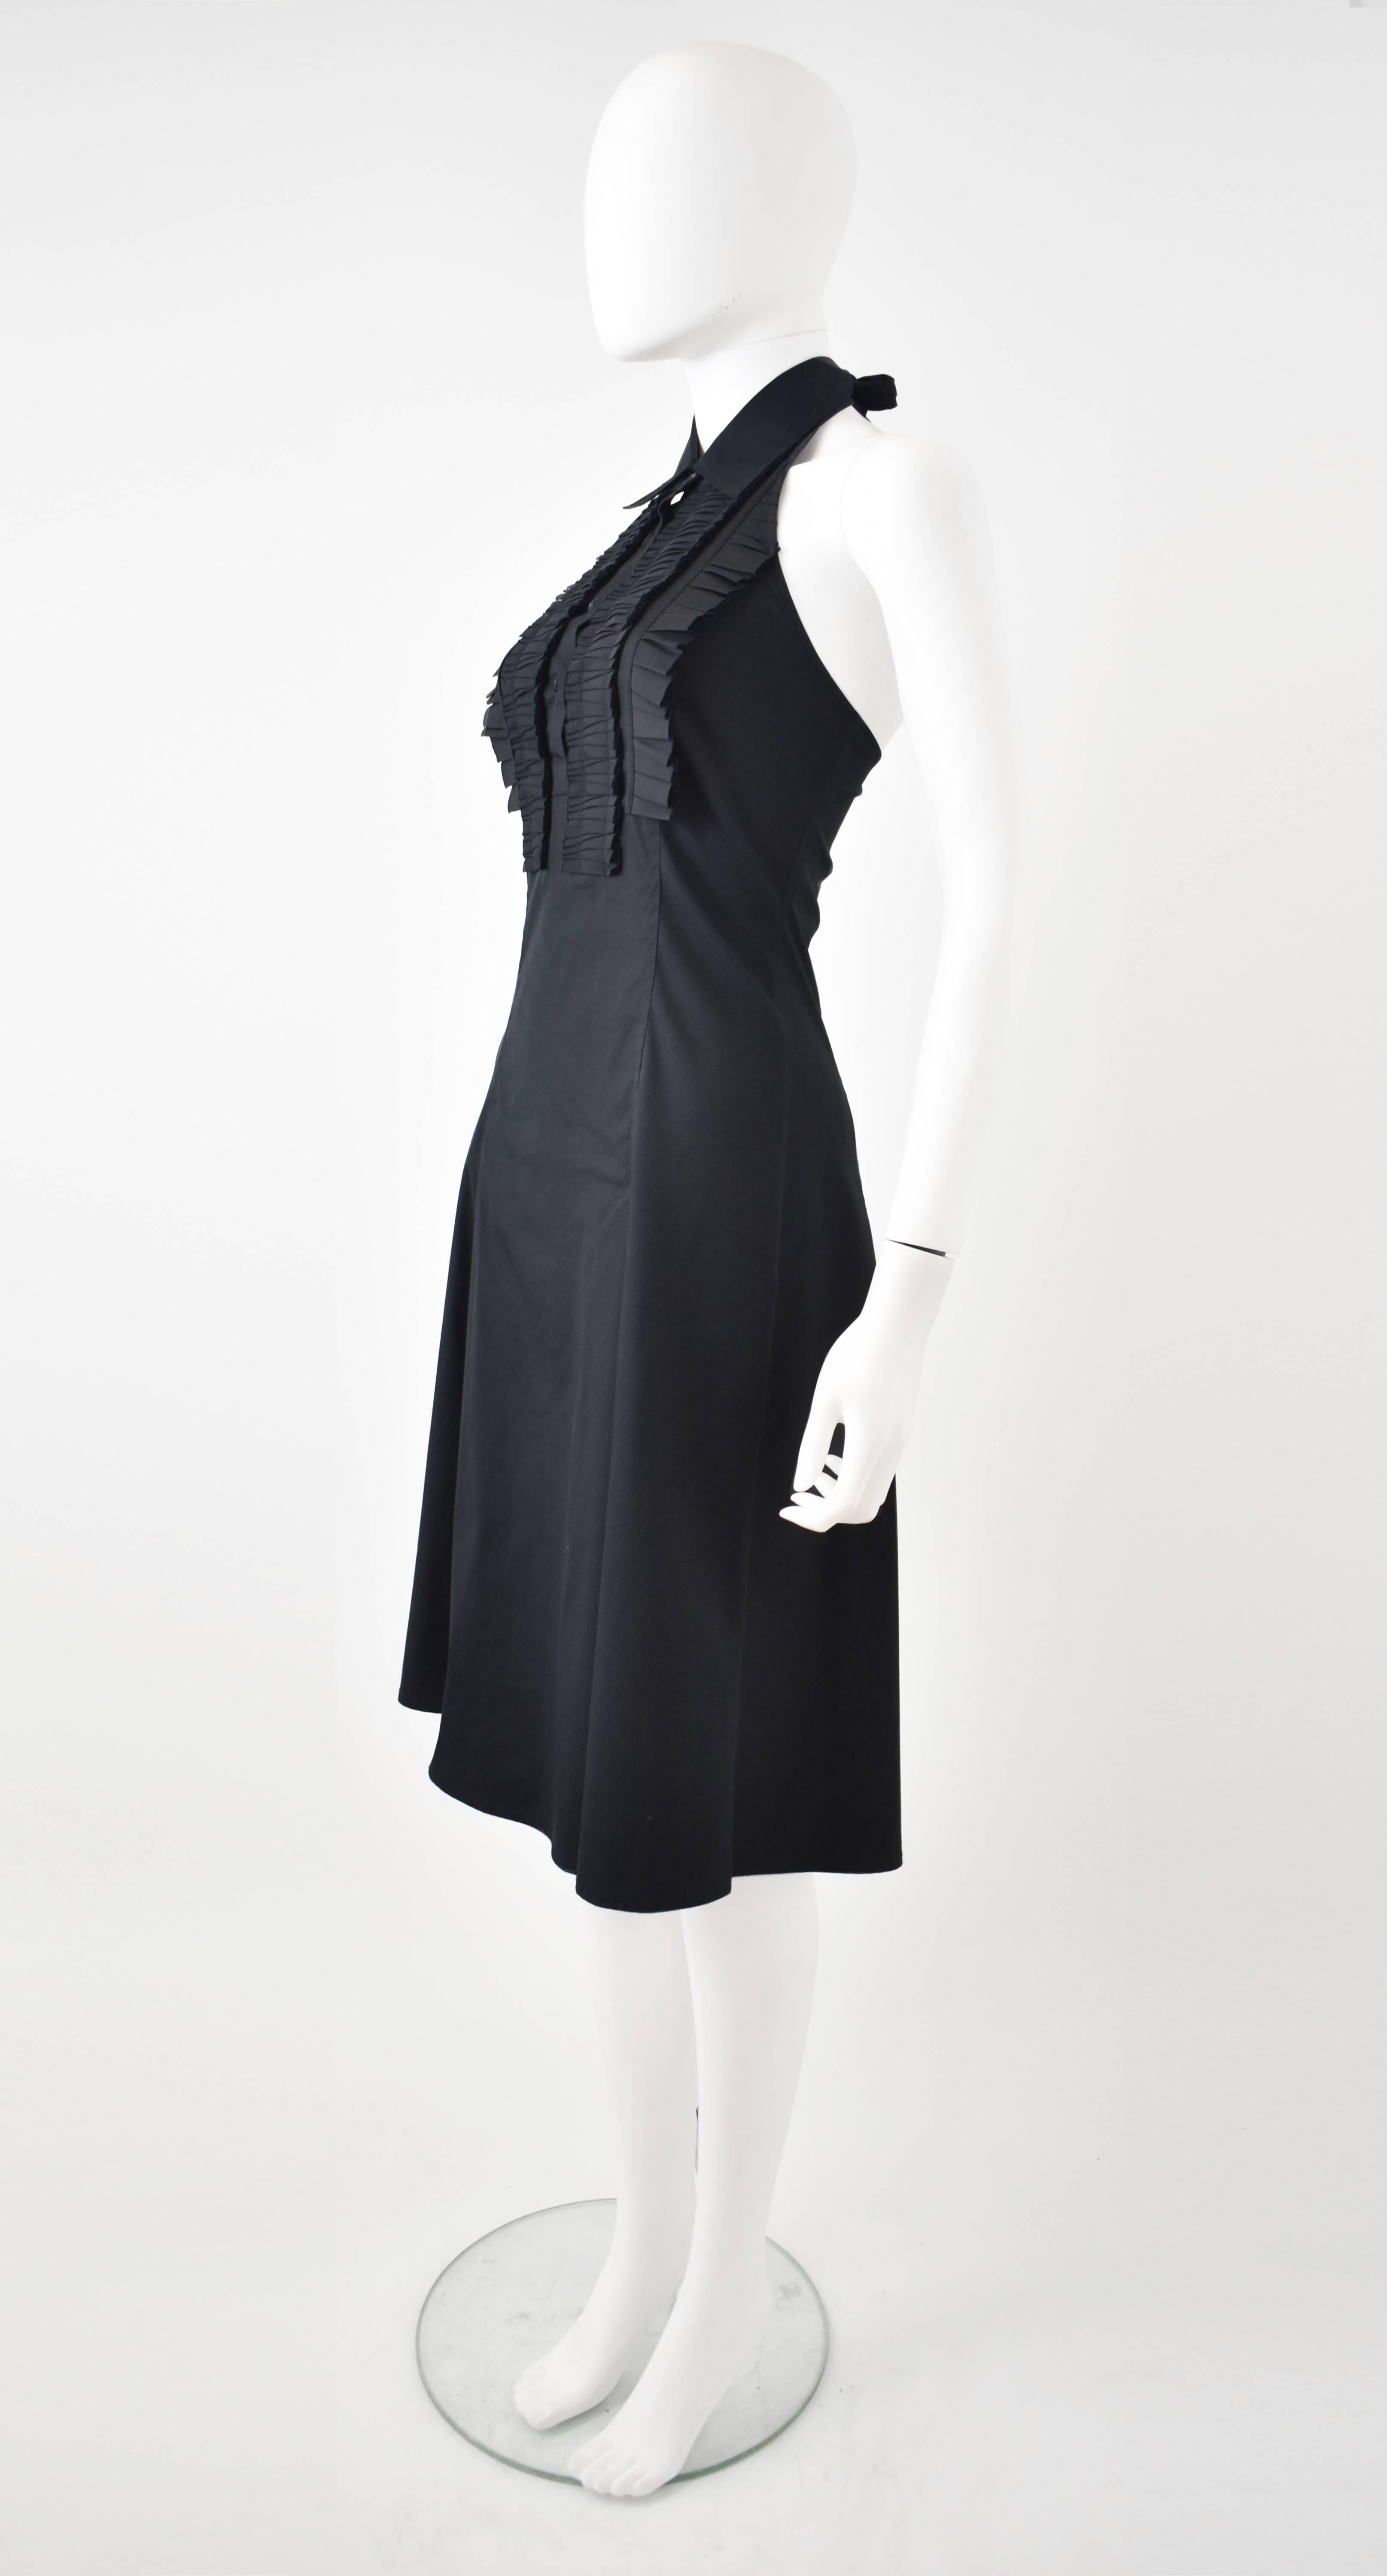 A beautiful and elegant black Summer dress from Celine. The dress has a halterneck design with a tie-fastening at the neck, a slim, fitted shape and a skirt that softly extends with a two pin tucks at the hip to create shape and volume. The front of